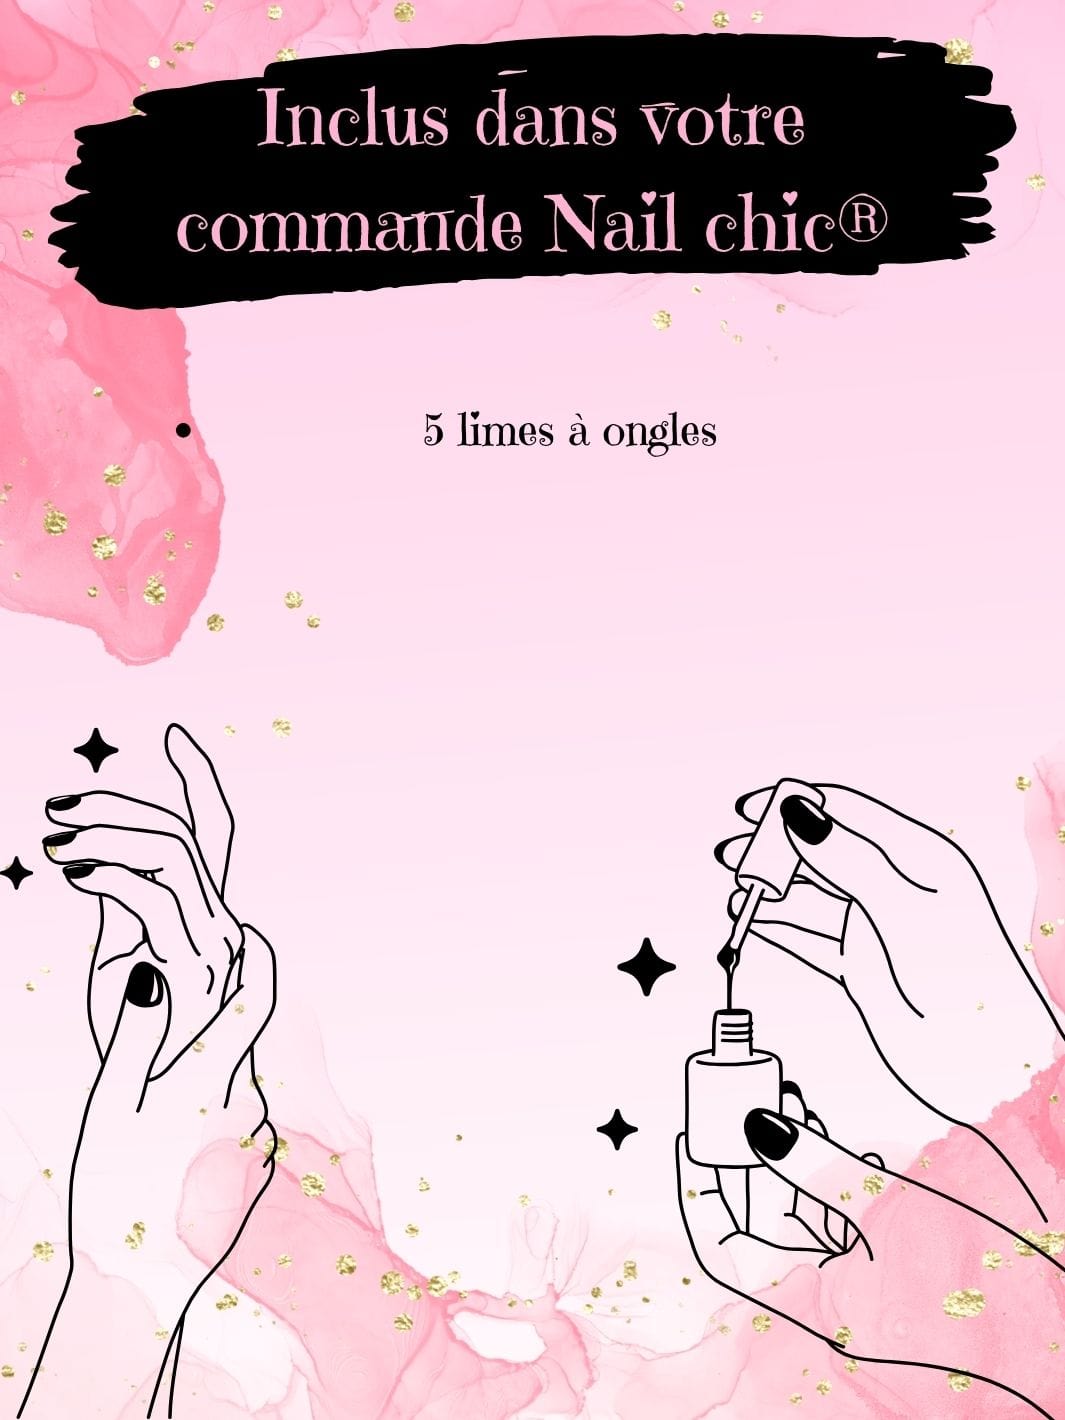 Meilleure lime a ongles Nail Chic